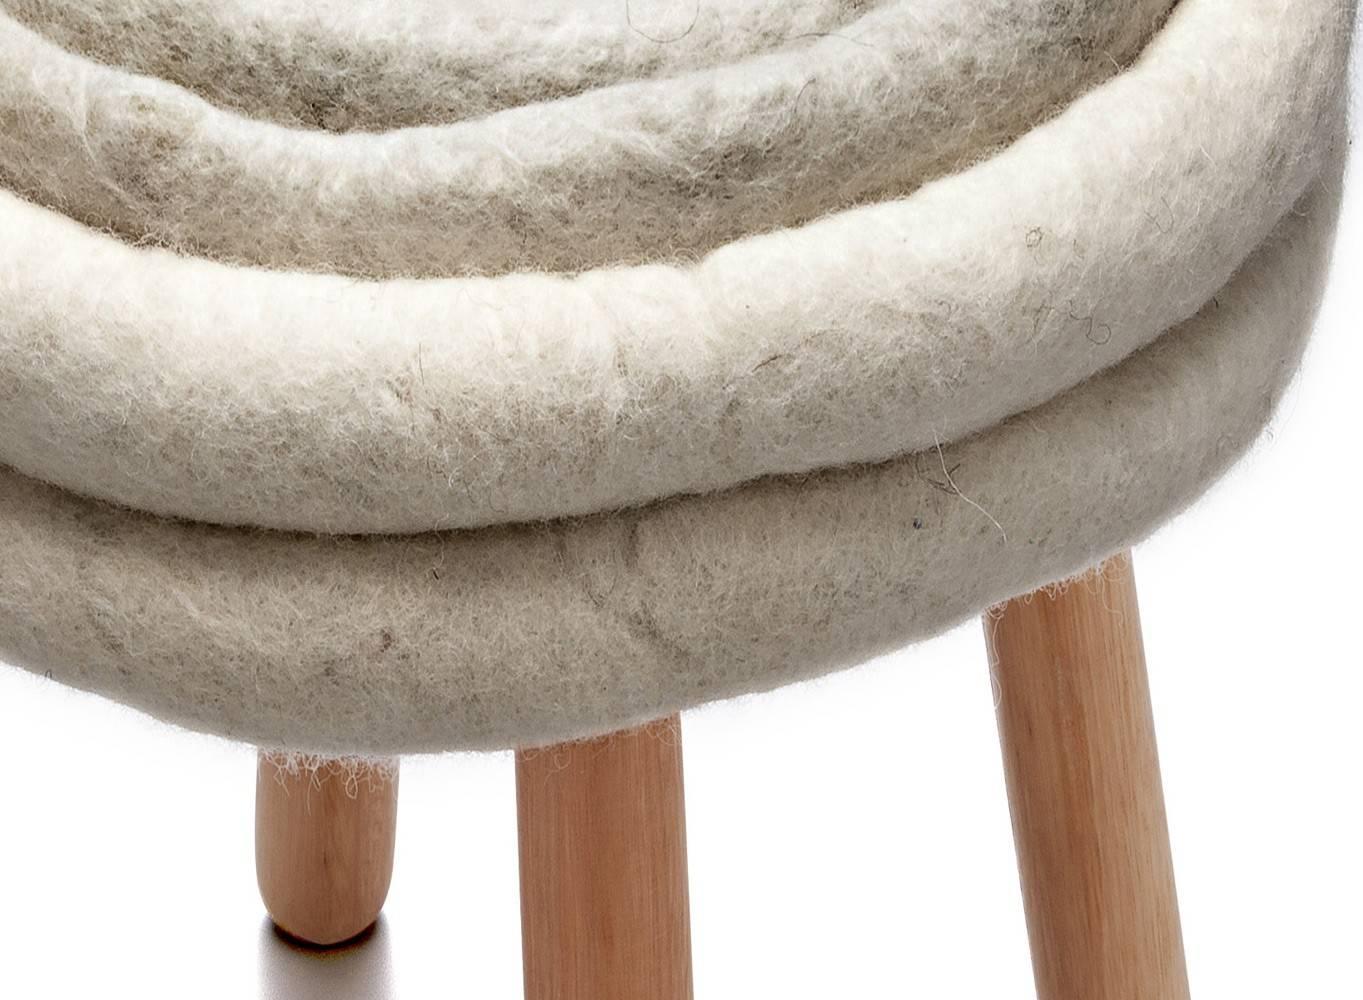 Inês Schertel's stool, in this Brazilian contemporary design, mixes ancient techniques for treating sheep wool with contemporary design and innovation, in order to create unique pieces, full of personality and craftsmanship.